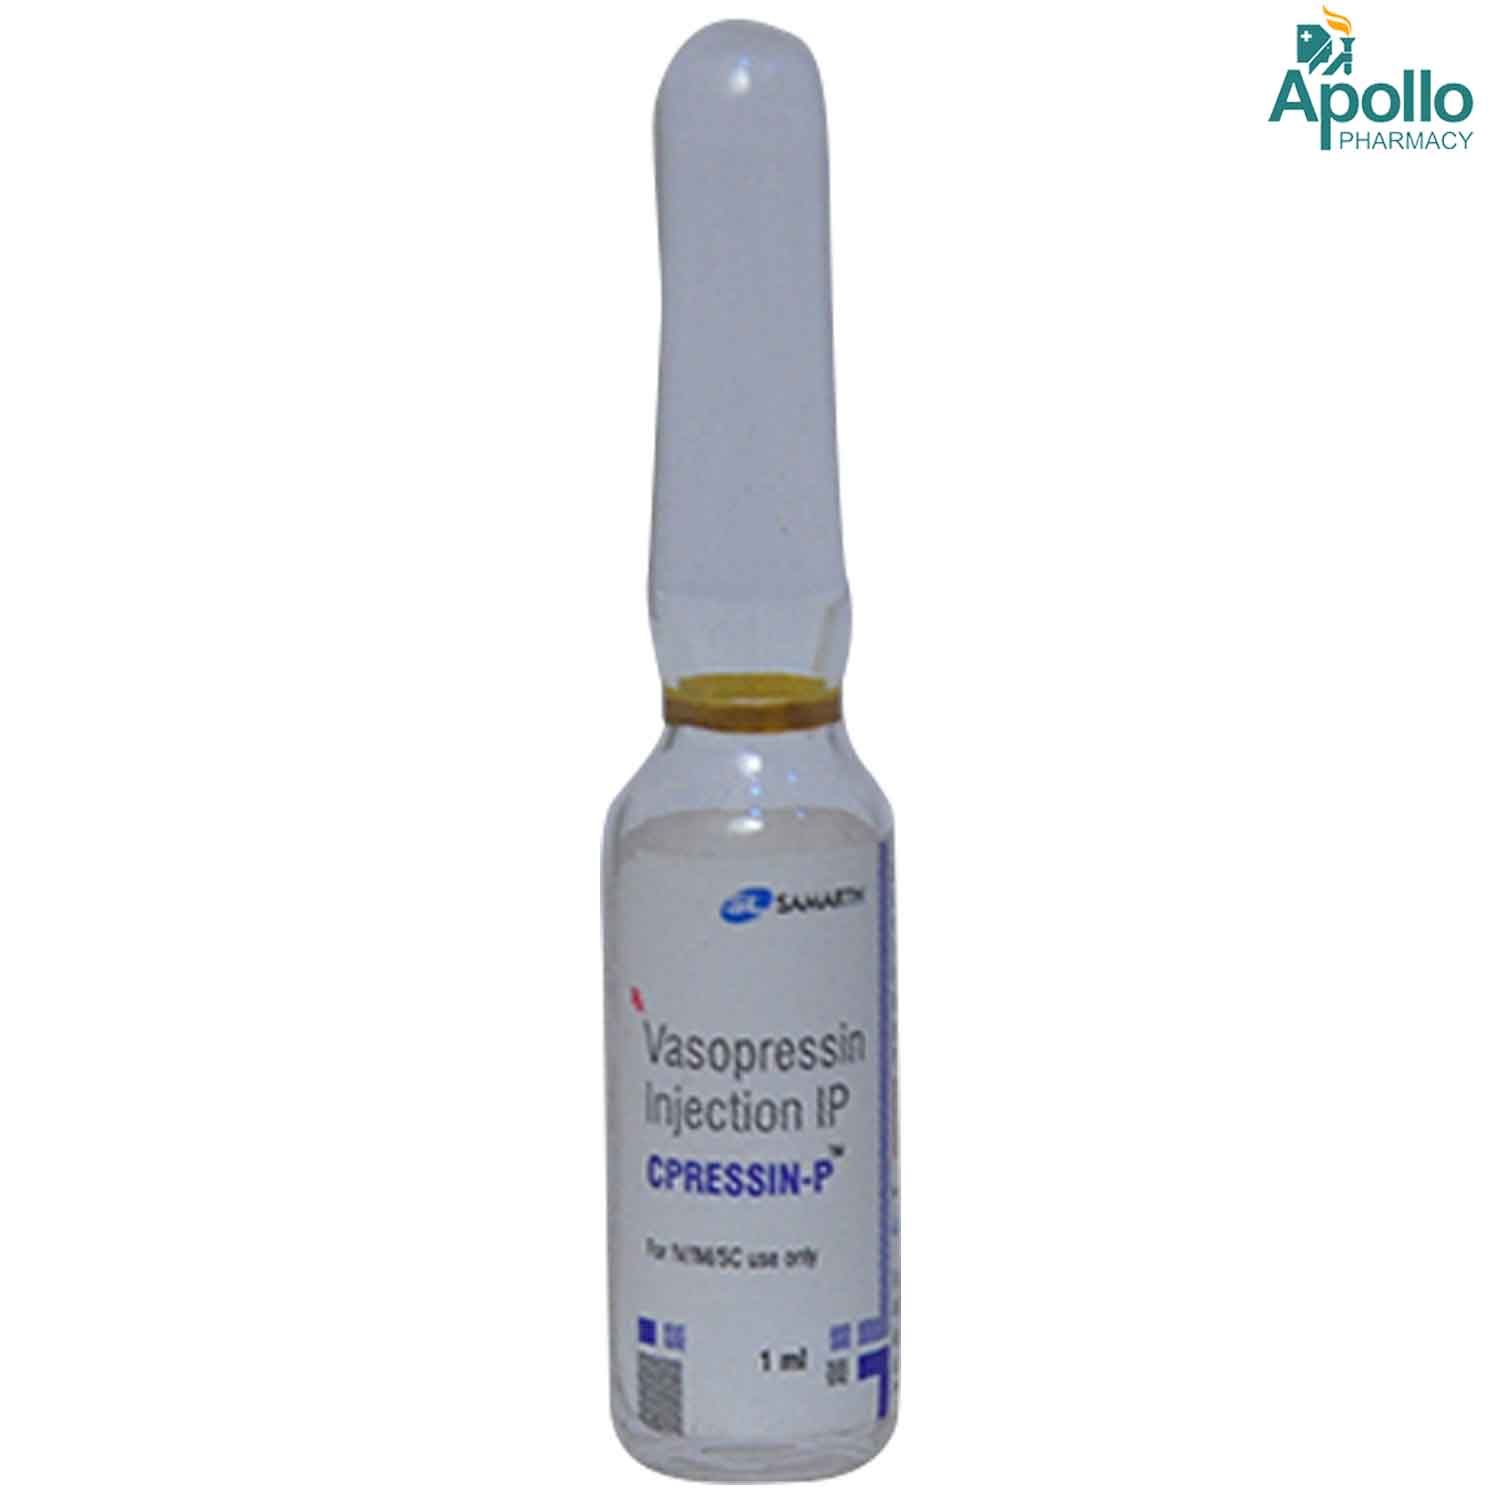 Buy Cpressin P Injection 1 ml Online